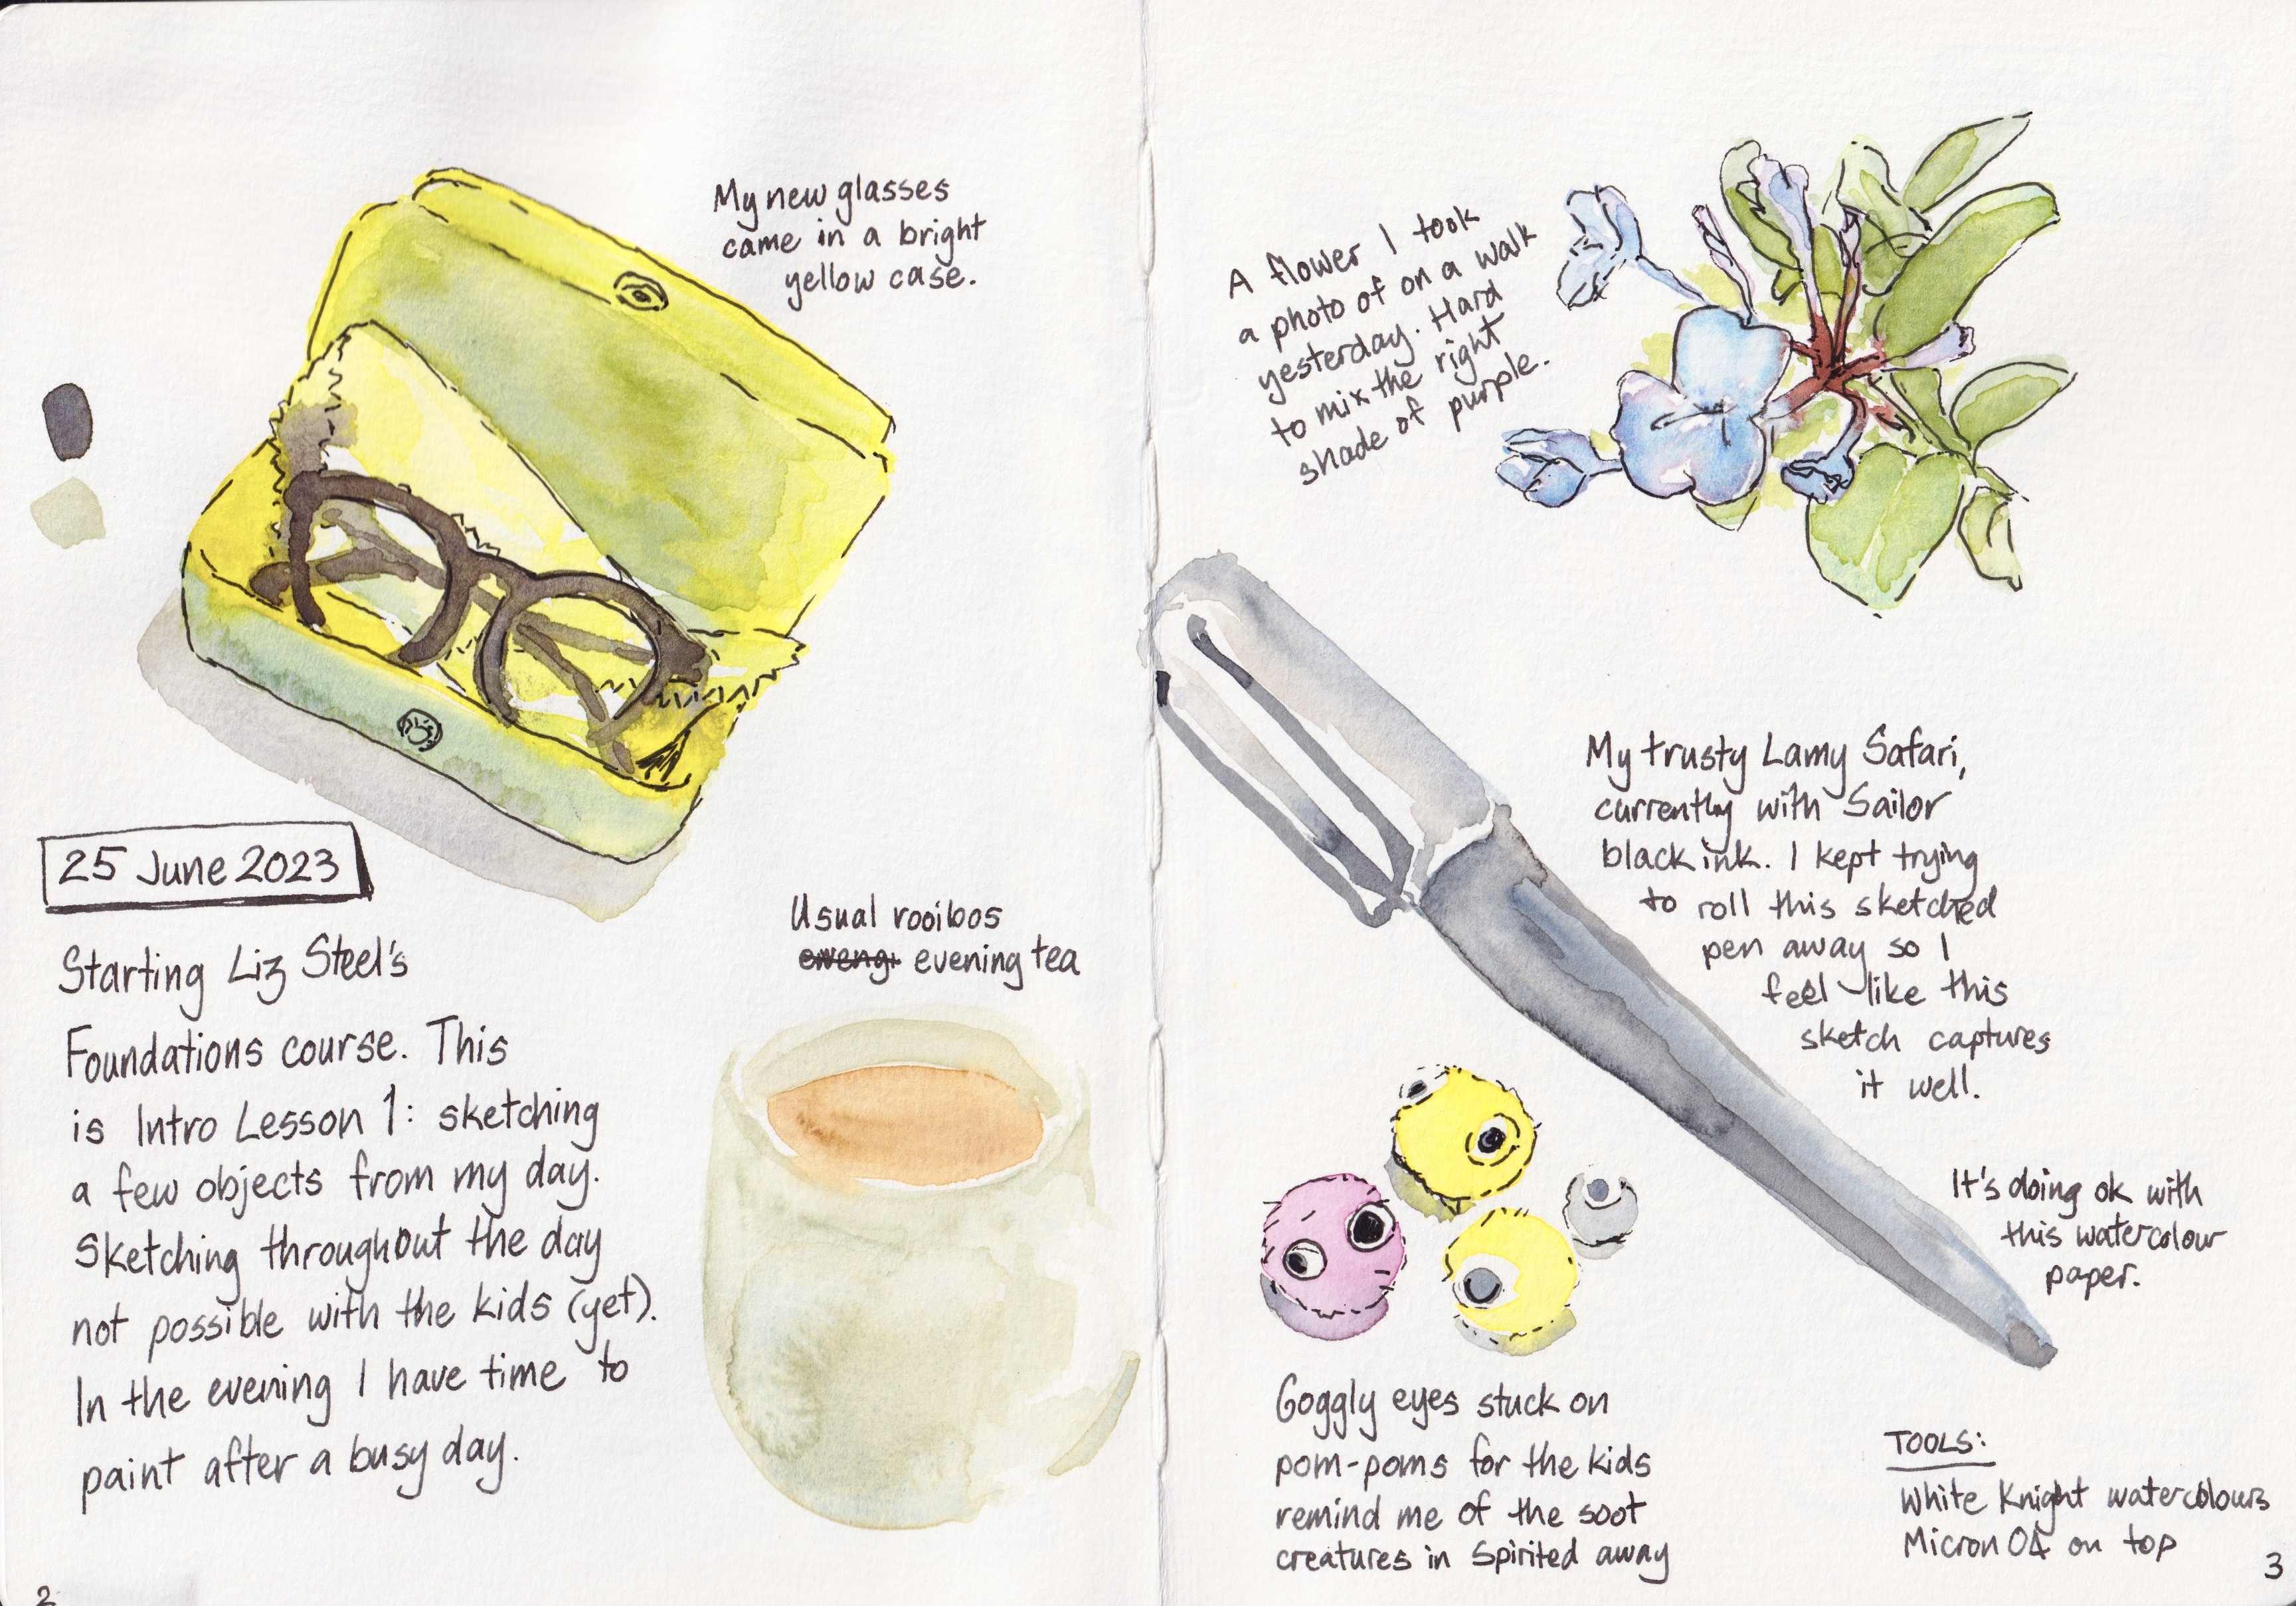 assets/sketchbook2 2.jpeg|sketching objects in my house